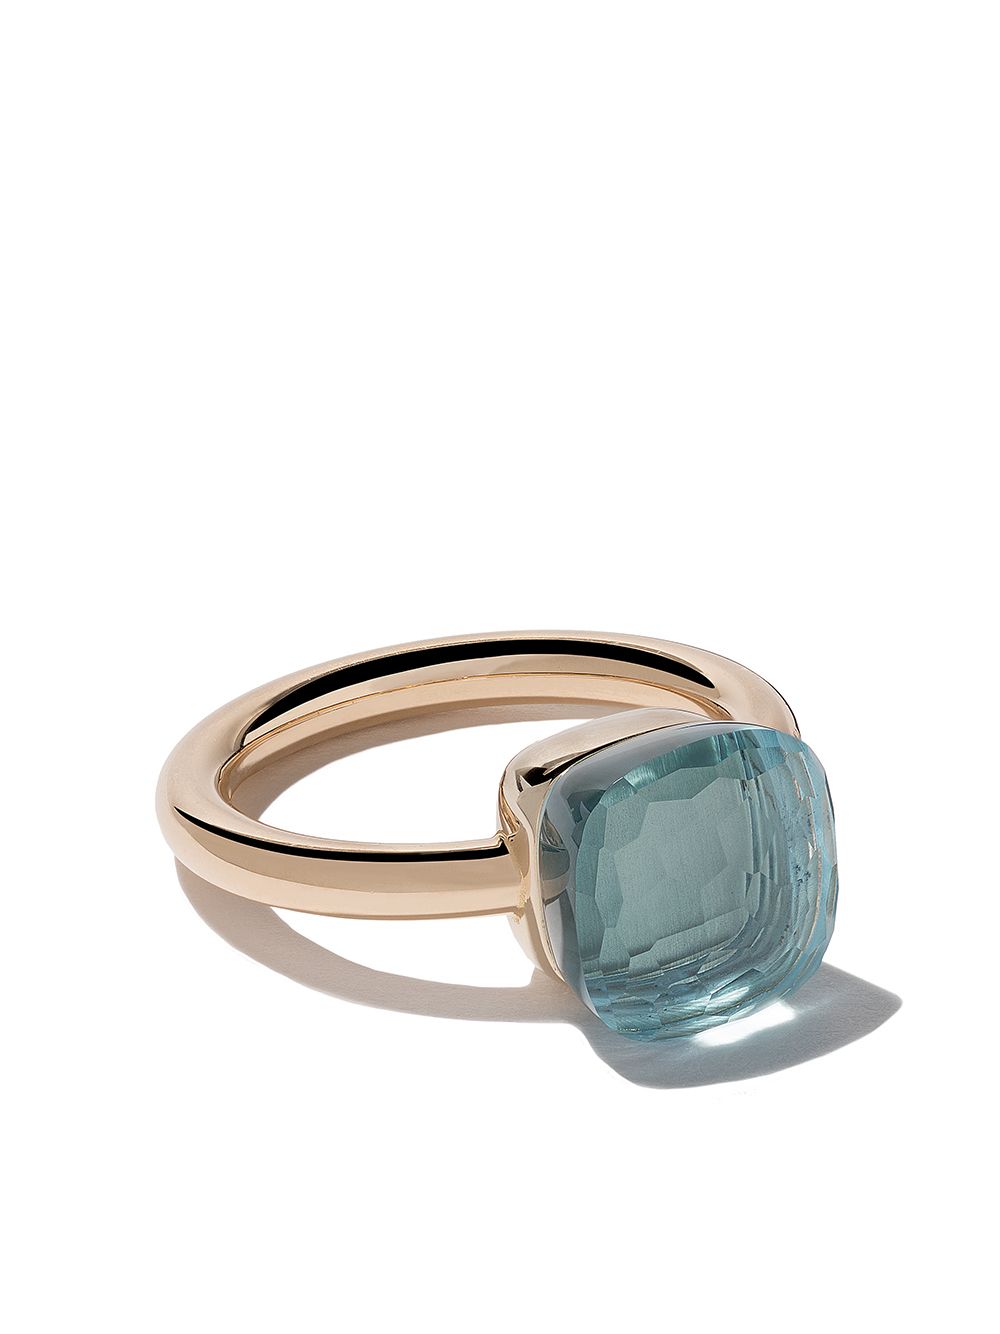 November birthstone: Topaz jewellery to shop this month (фото 8)